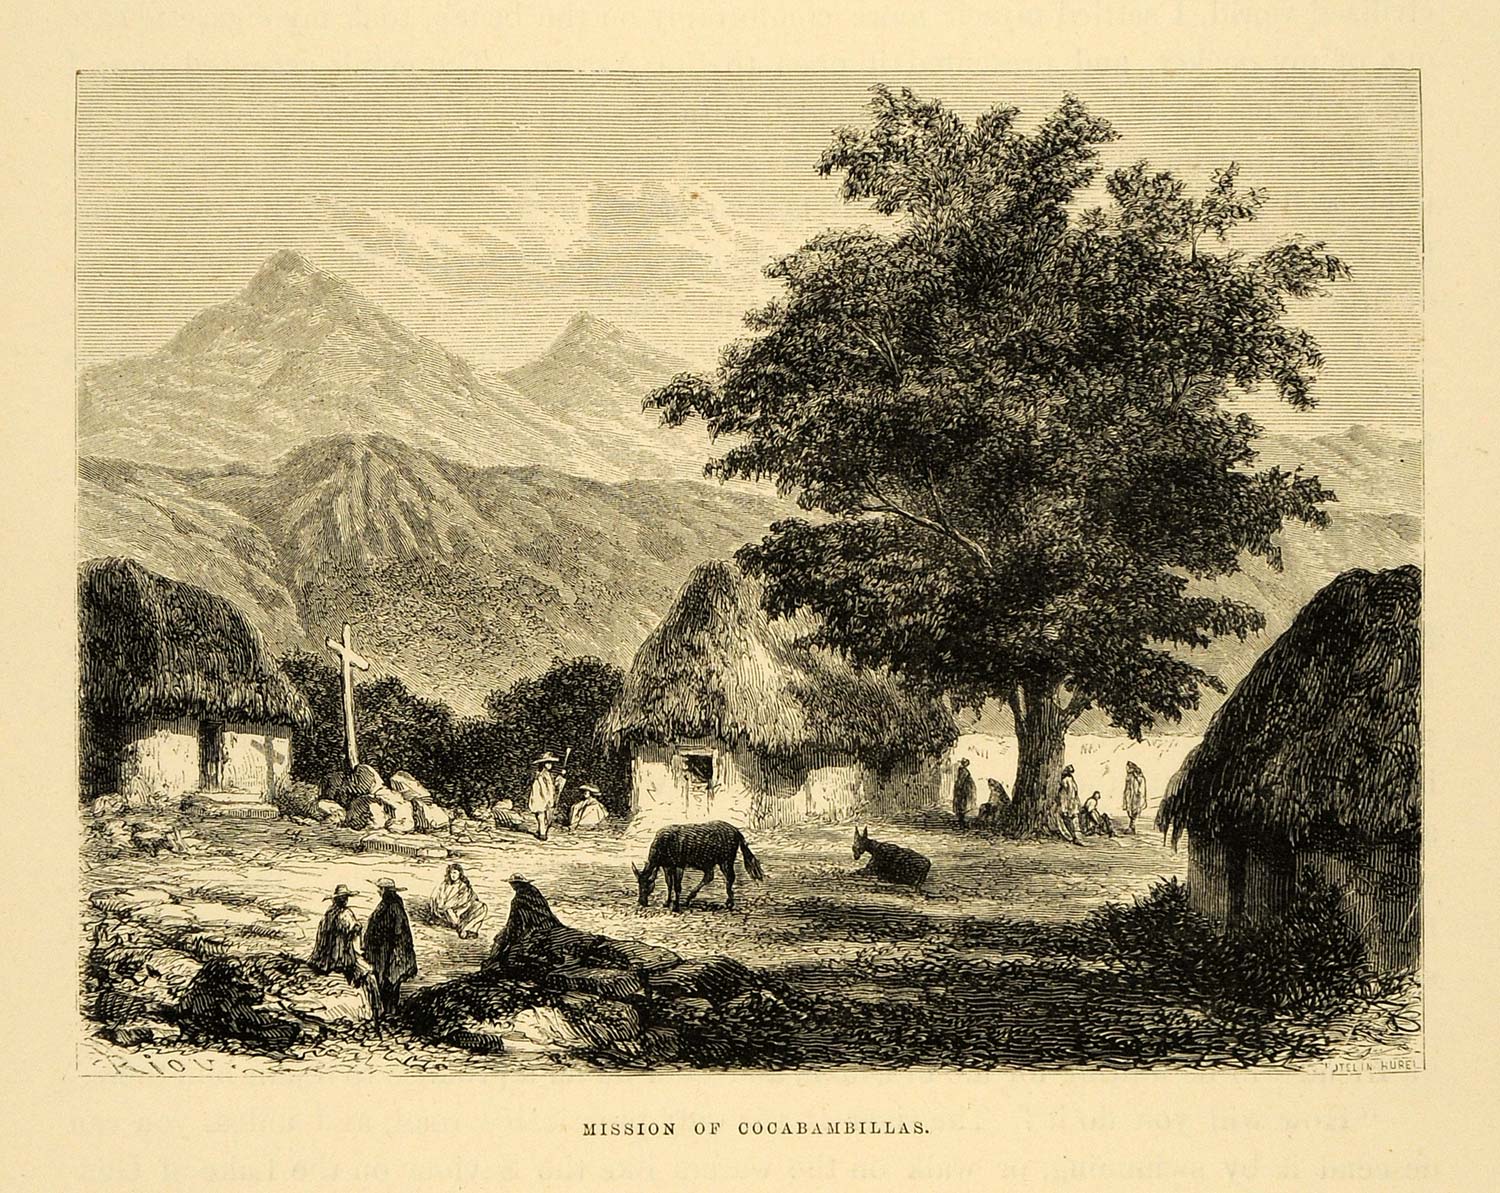 1875 Wood Engraving Cocabambillas Mission Landscape Mountains Tree Hovel XGB3